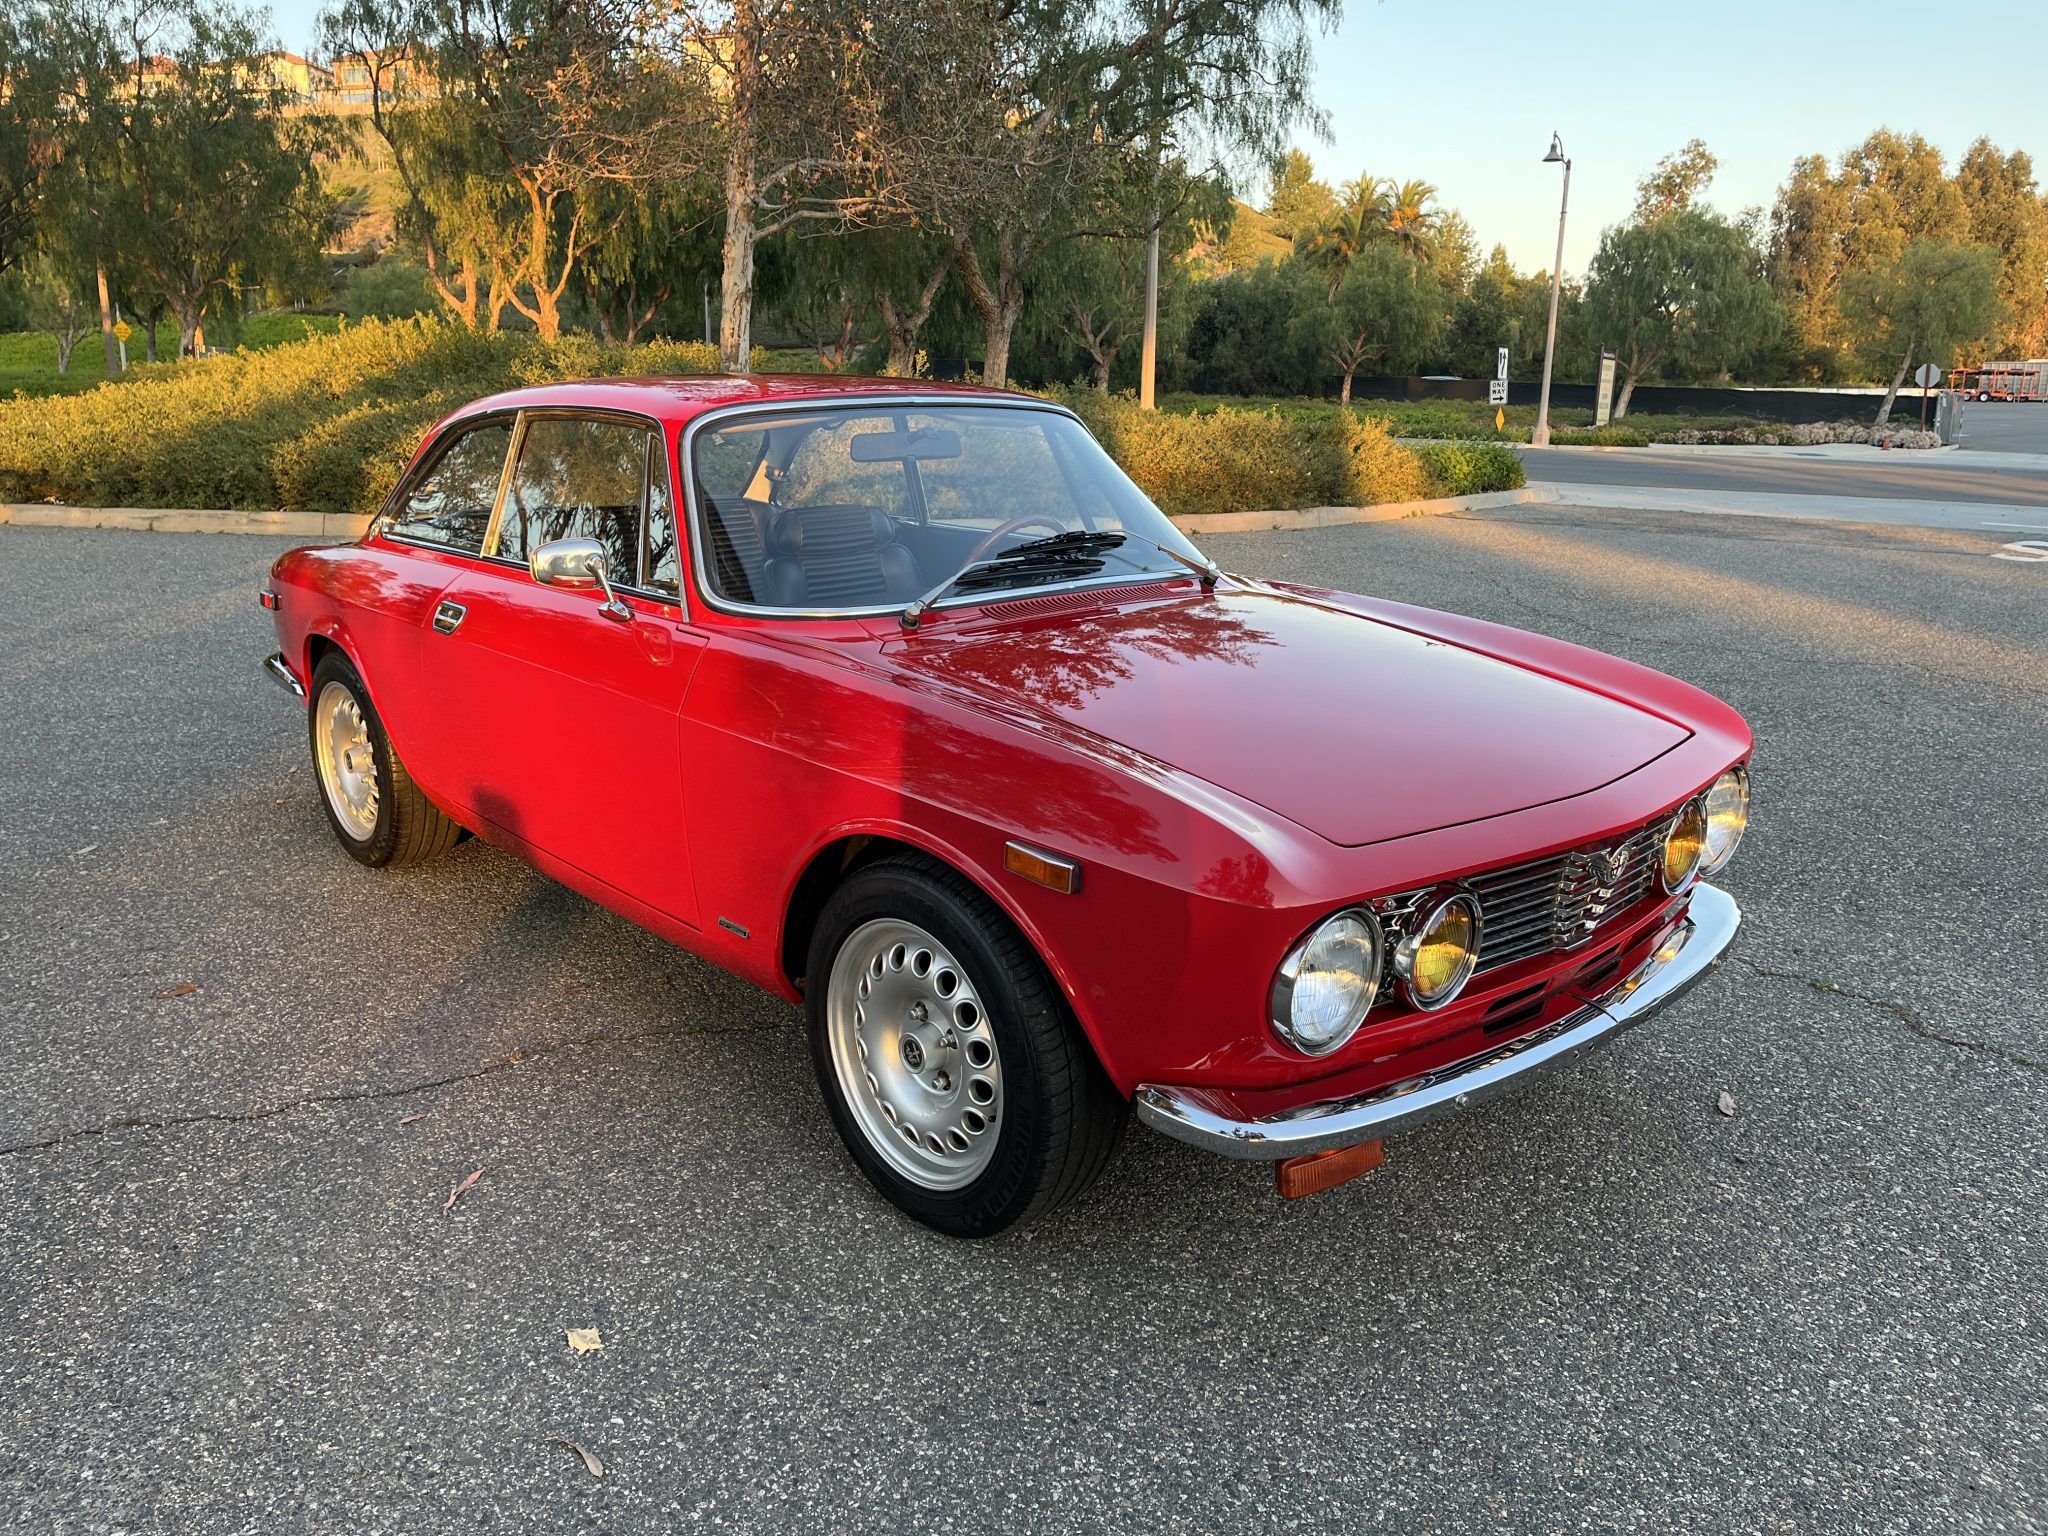 1972 Alfa Romeo Gtv 2000 Is Our Auction Pick Of The Day